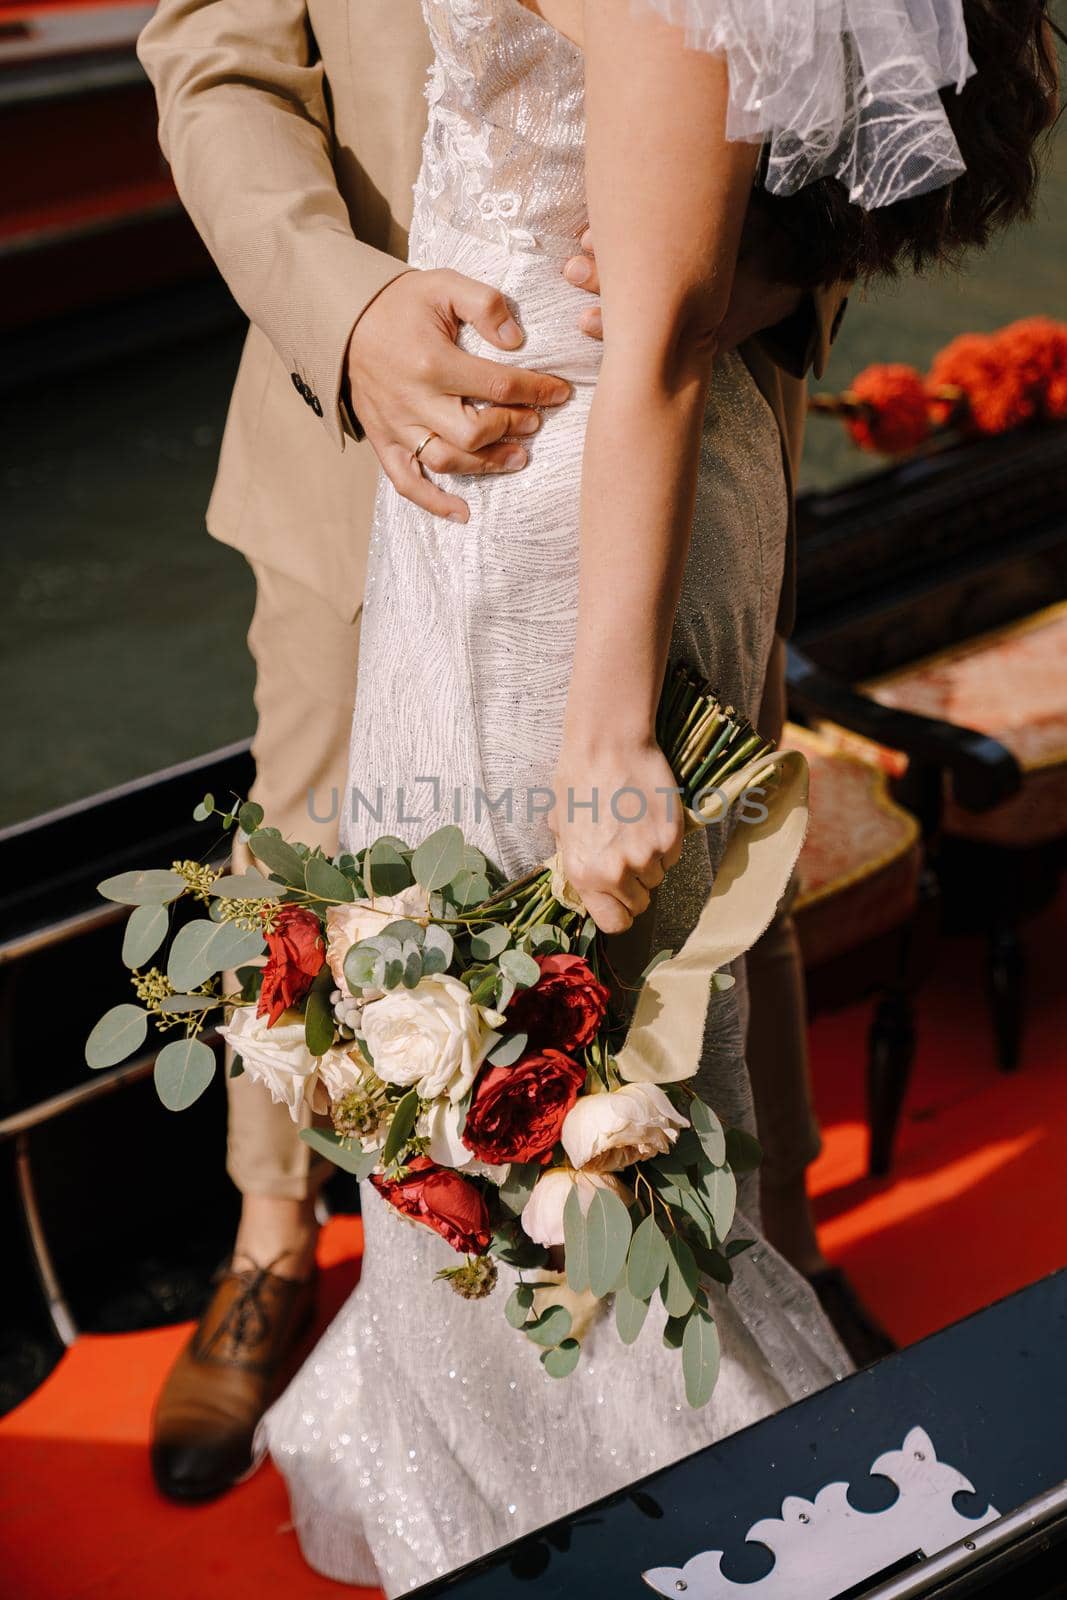 Close-up - the groom hugs the bride by the waist in a classic wooden gondola. The bride holds a lush bouquet of white and red roses in her hand.